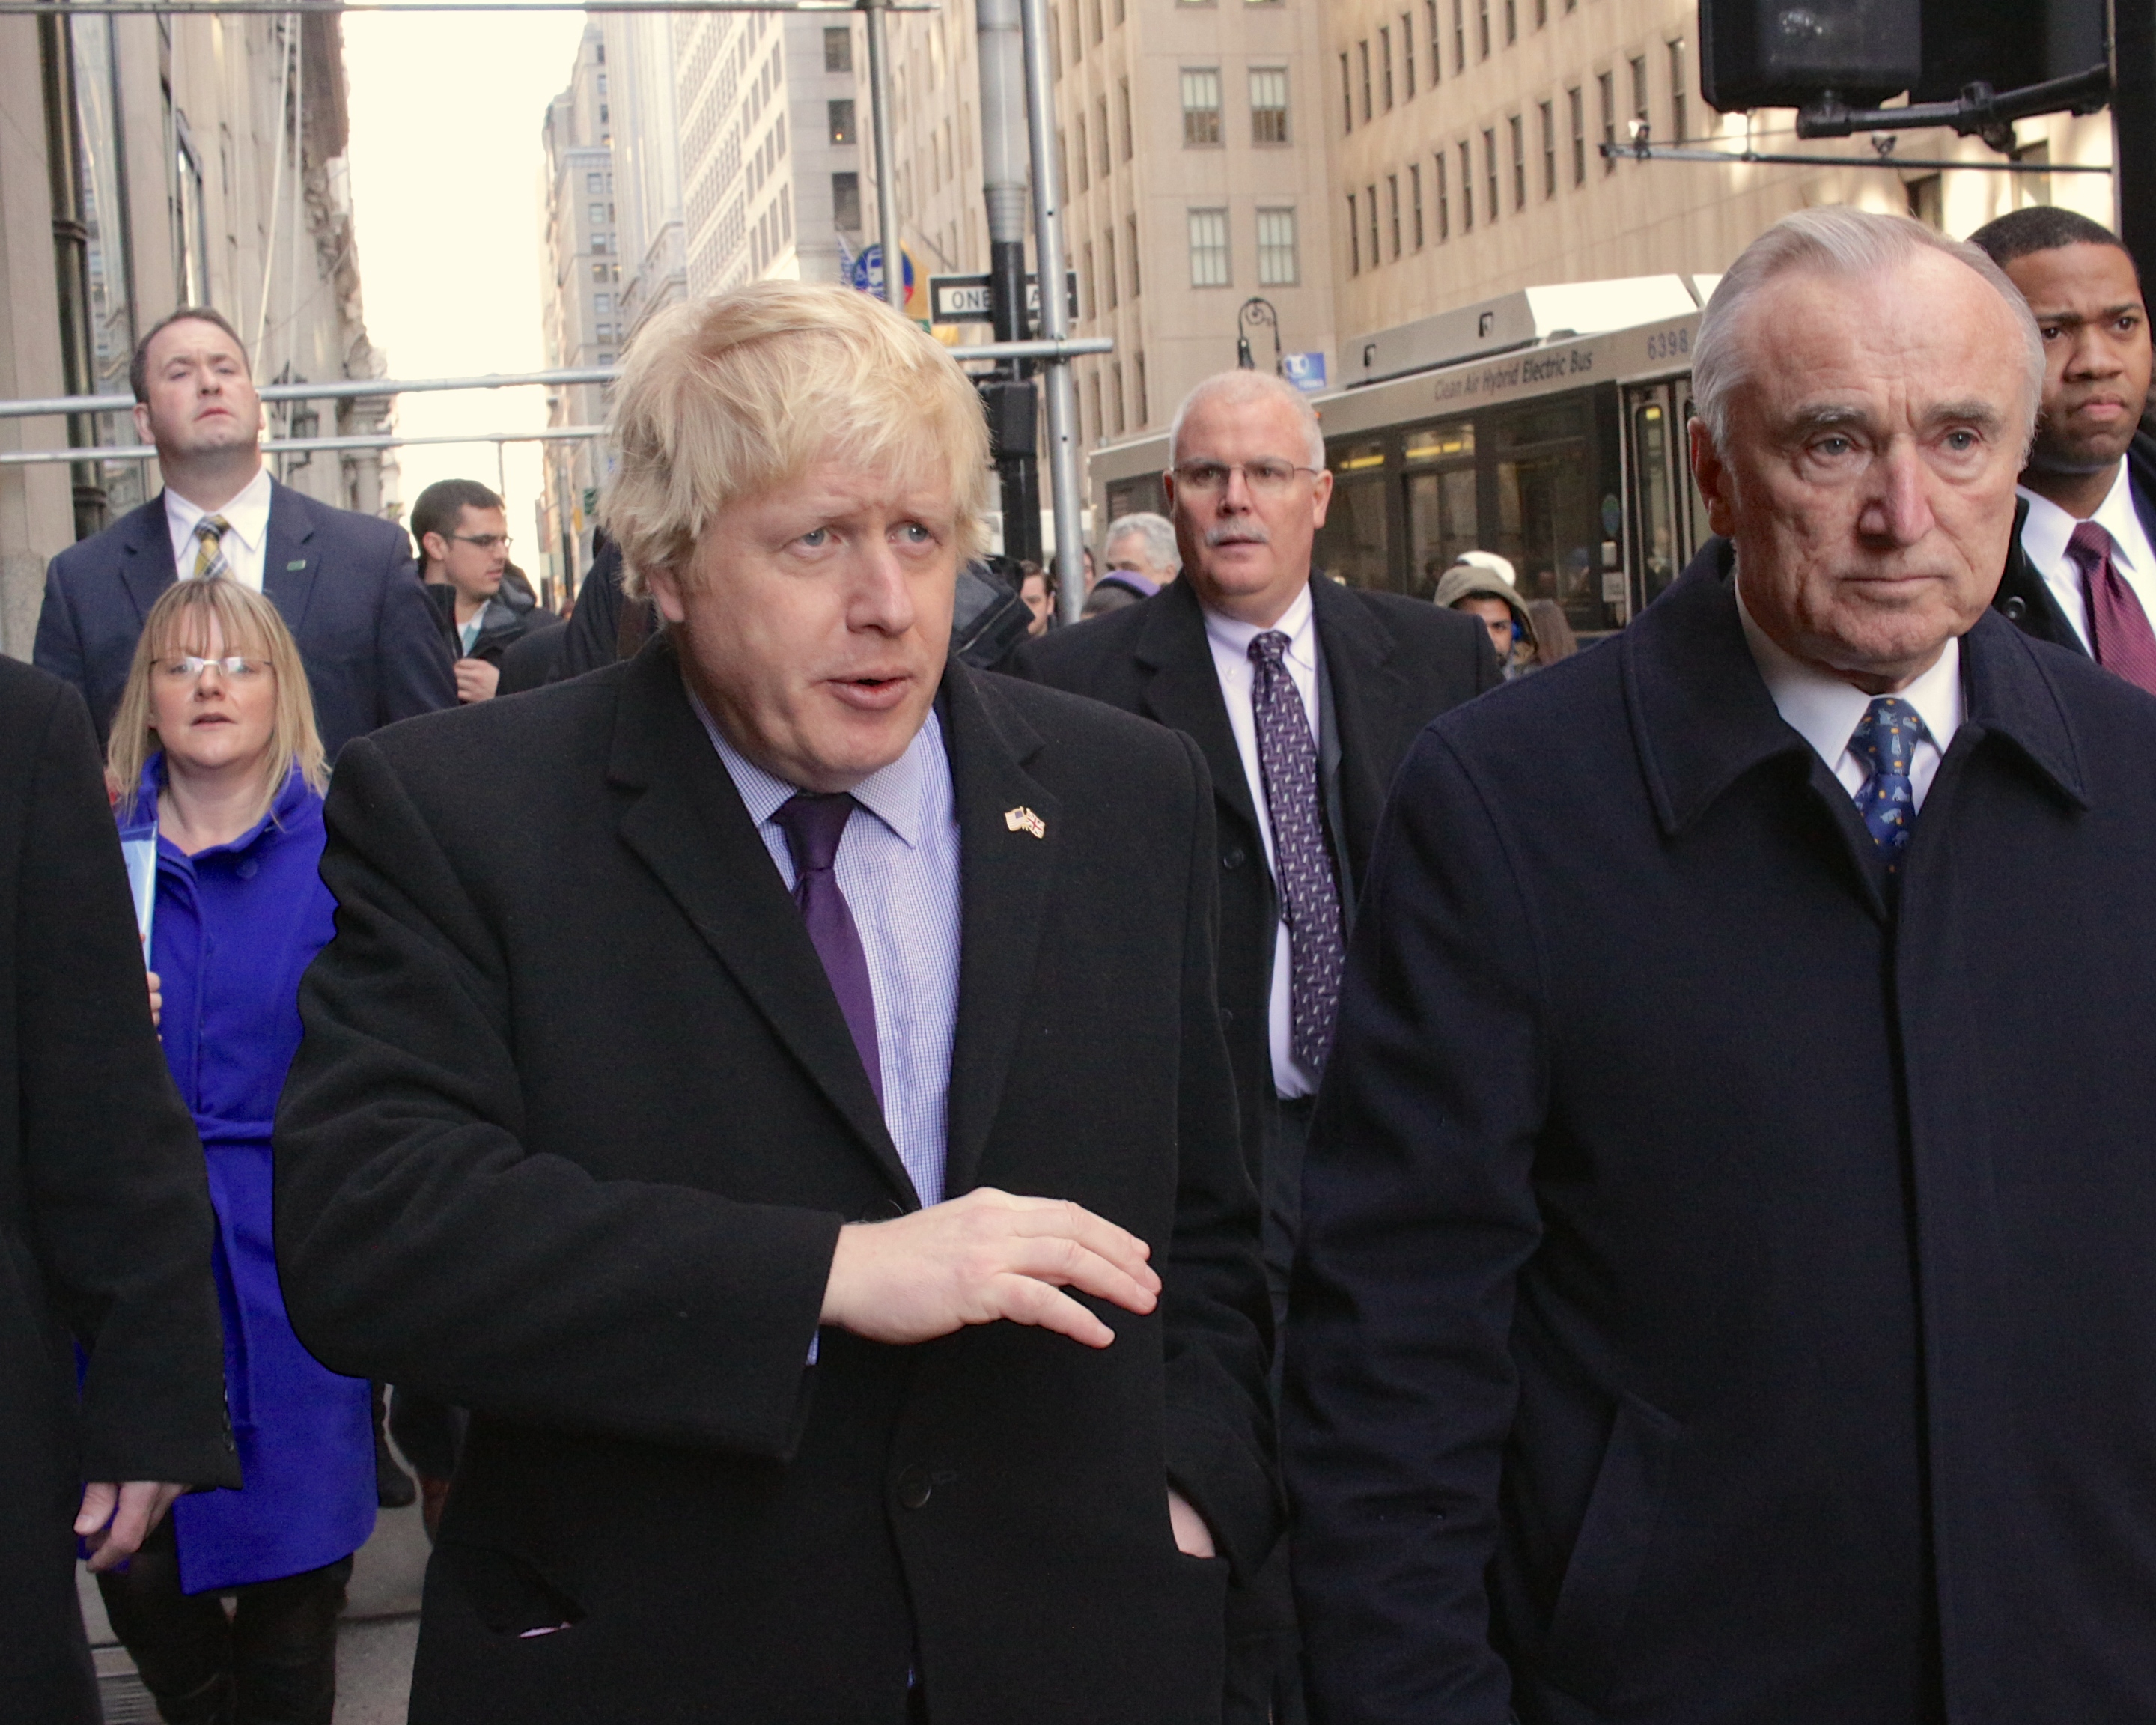 London Mayor Boris Johnson meets with Police Commissioner William Bratton at the NYPD's Lower Manhattan Security Initiative in New York City, on February 11, 2015. "We just had an extraordinary presentation on data collection of surveillance cameras and we are looking at New York as a leader in making that data work for us," Mayor Johnson said at a news conference on Wednesday. (Photo by John M. Mantel) *** Please Use Credit from Credit Field ***